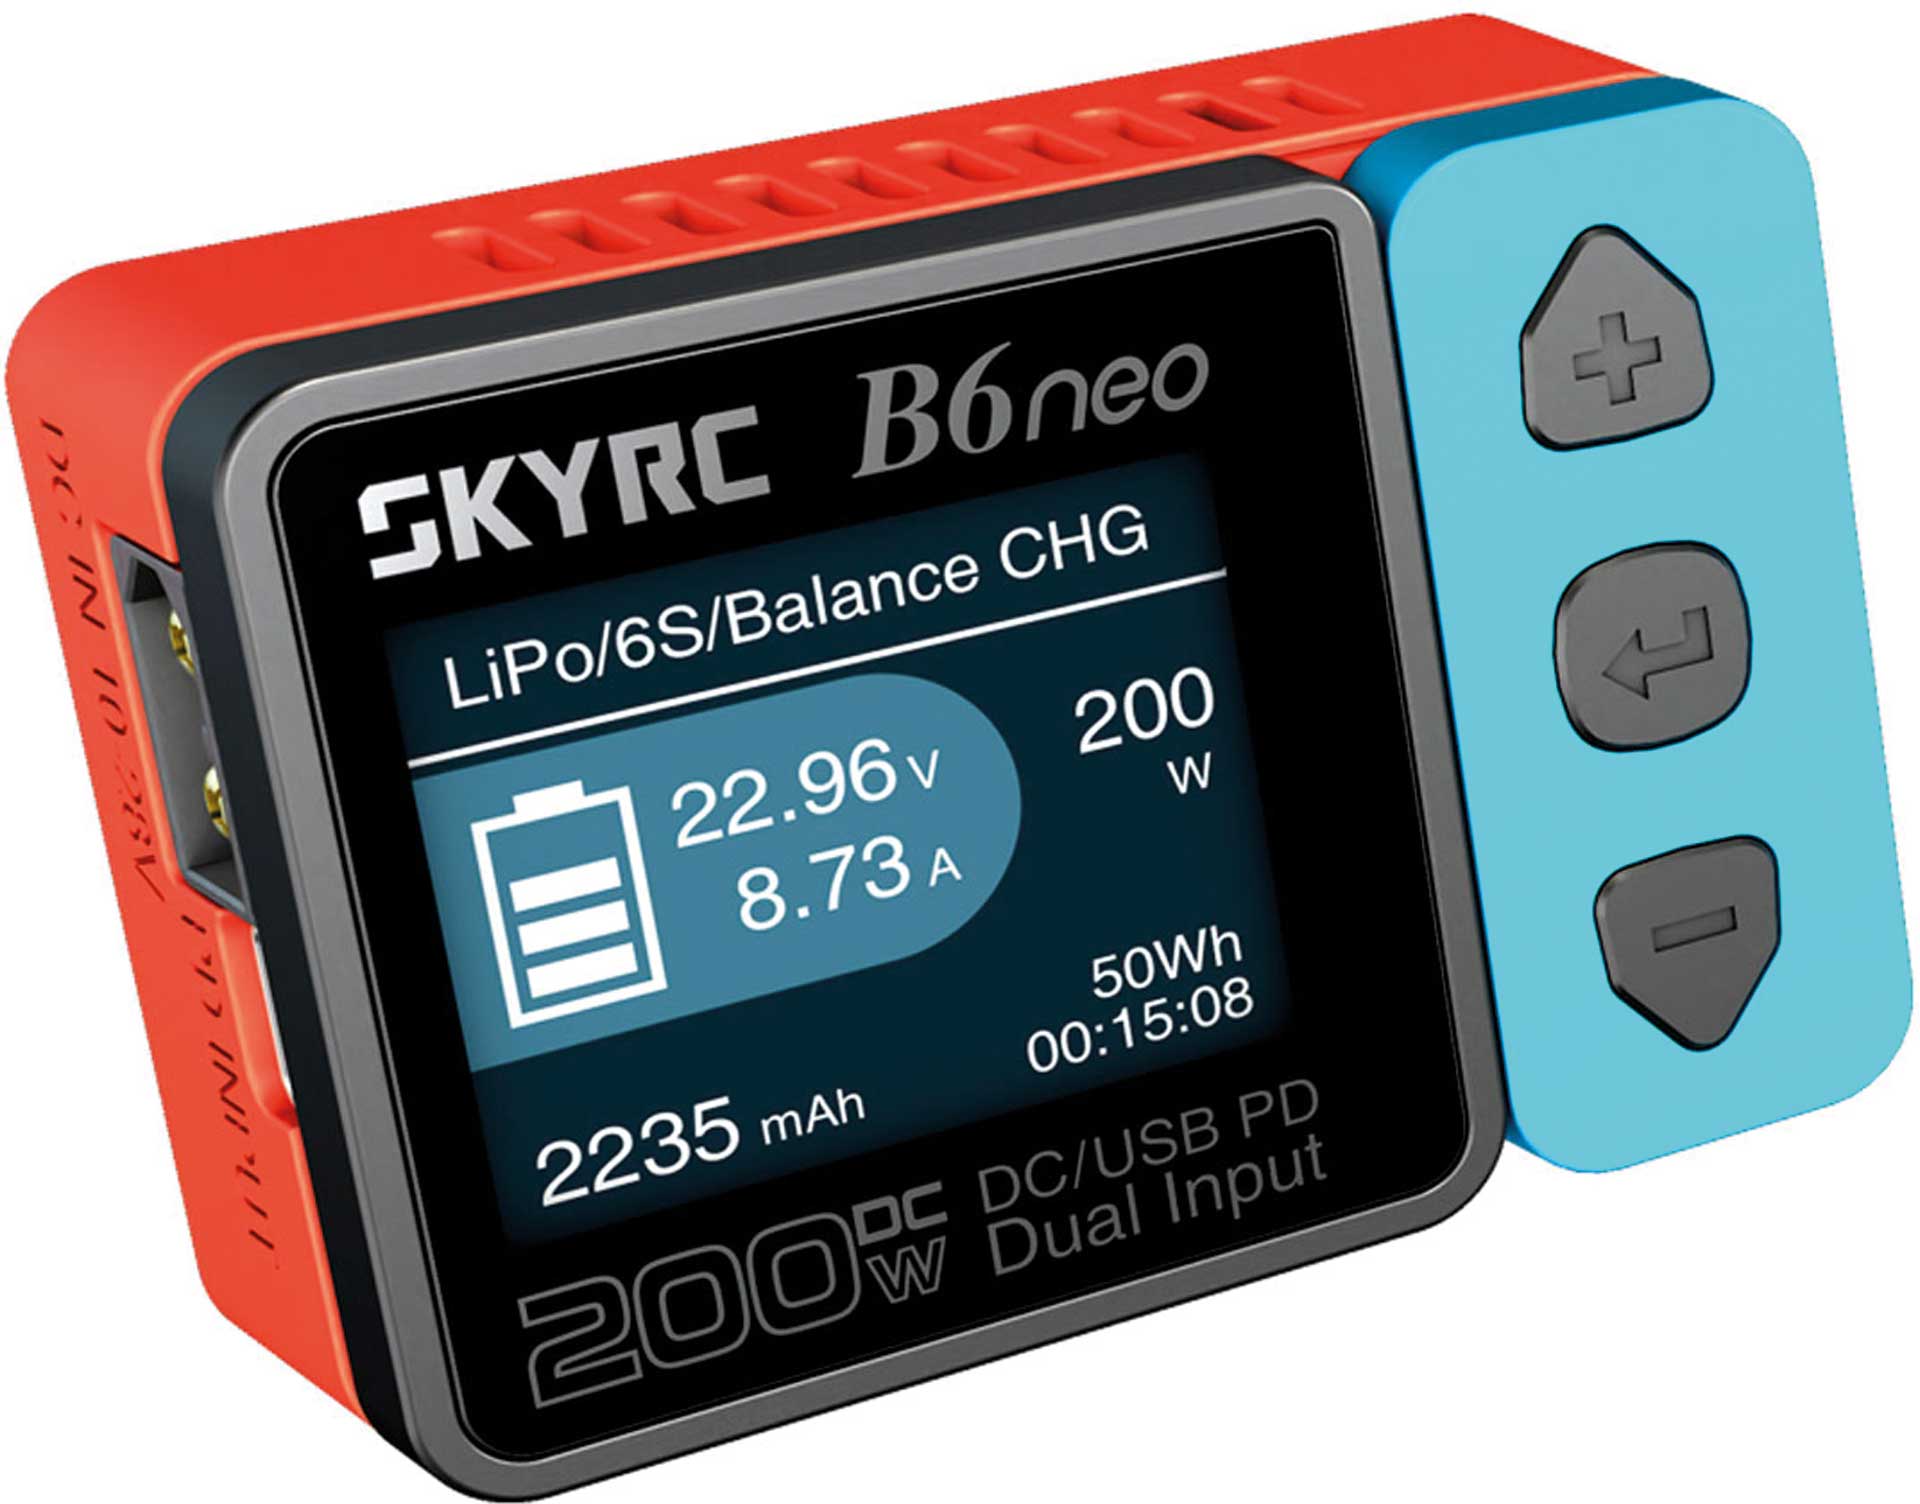 SKYRC B6neo Smart Charger LiPo 1-6s 10A 200W